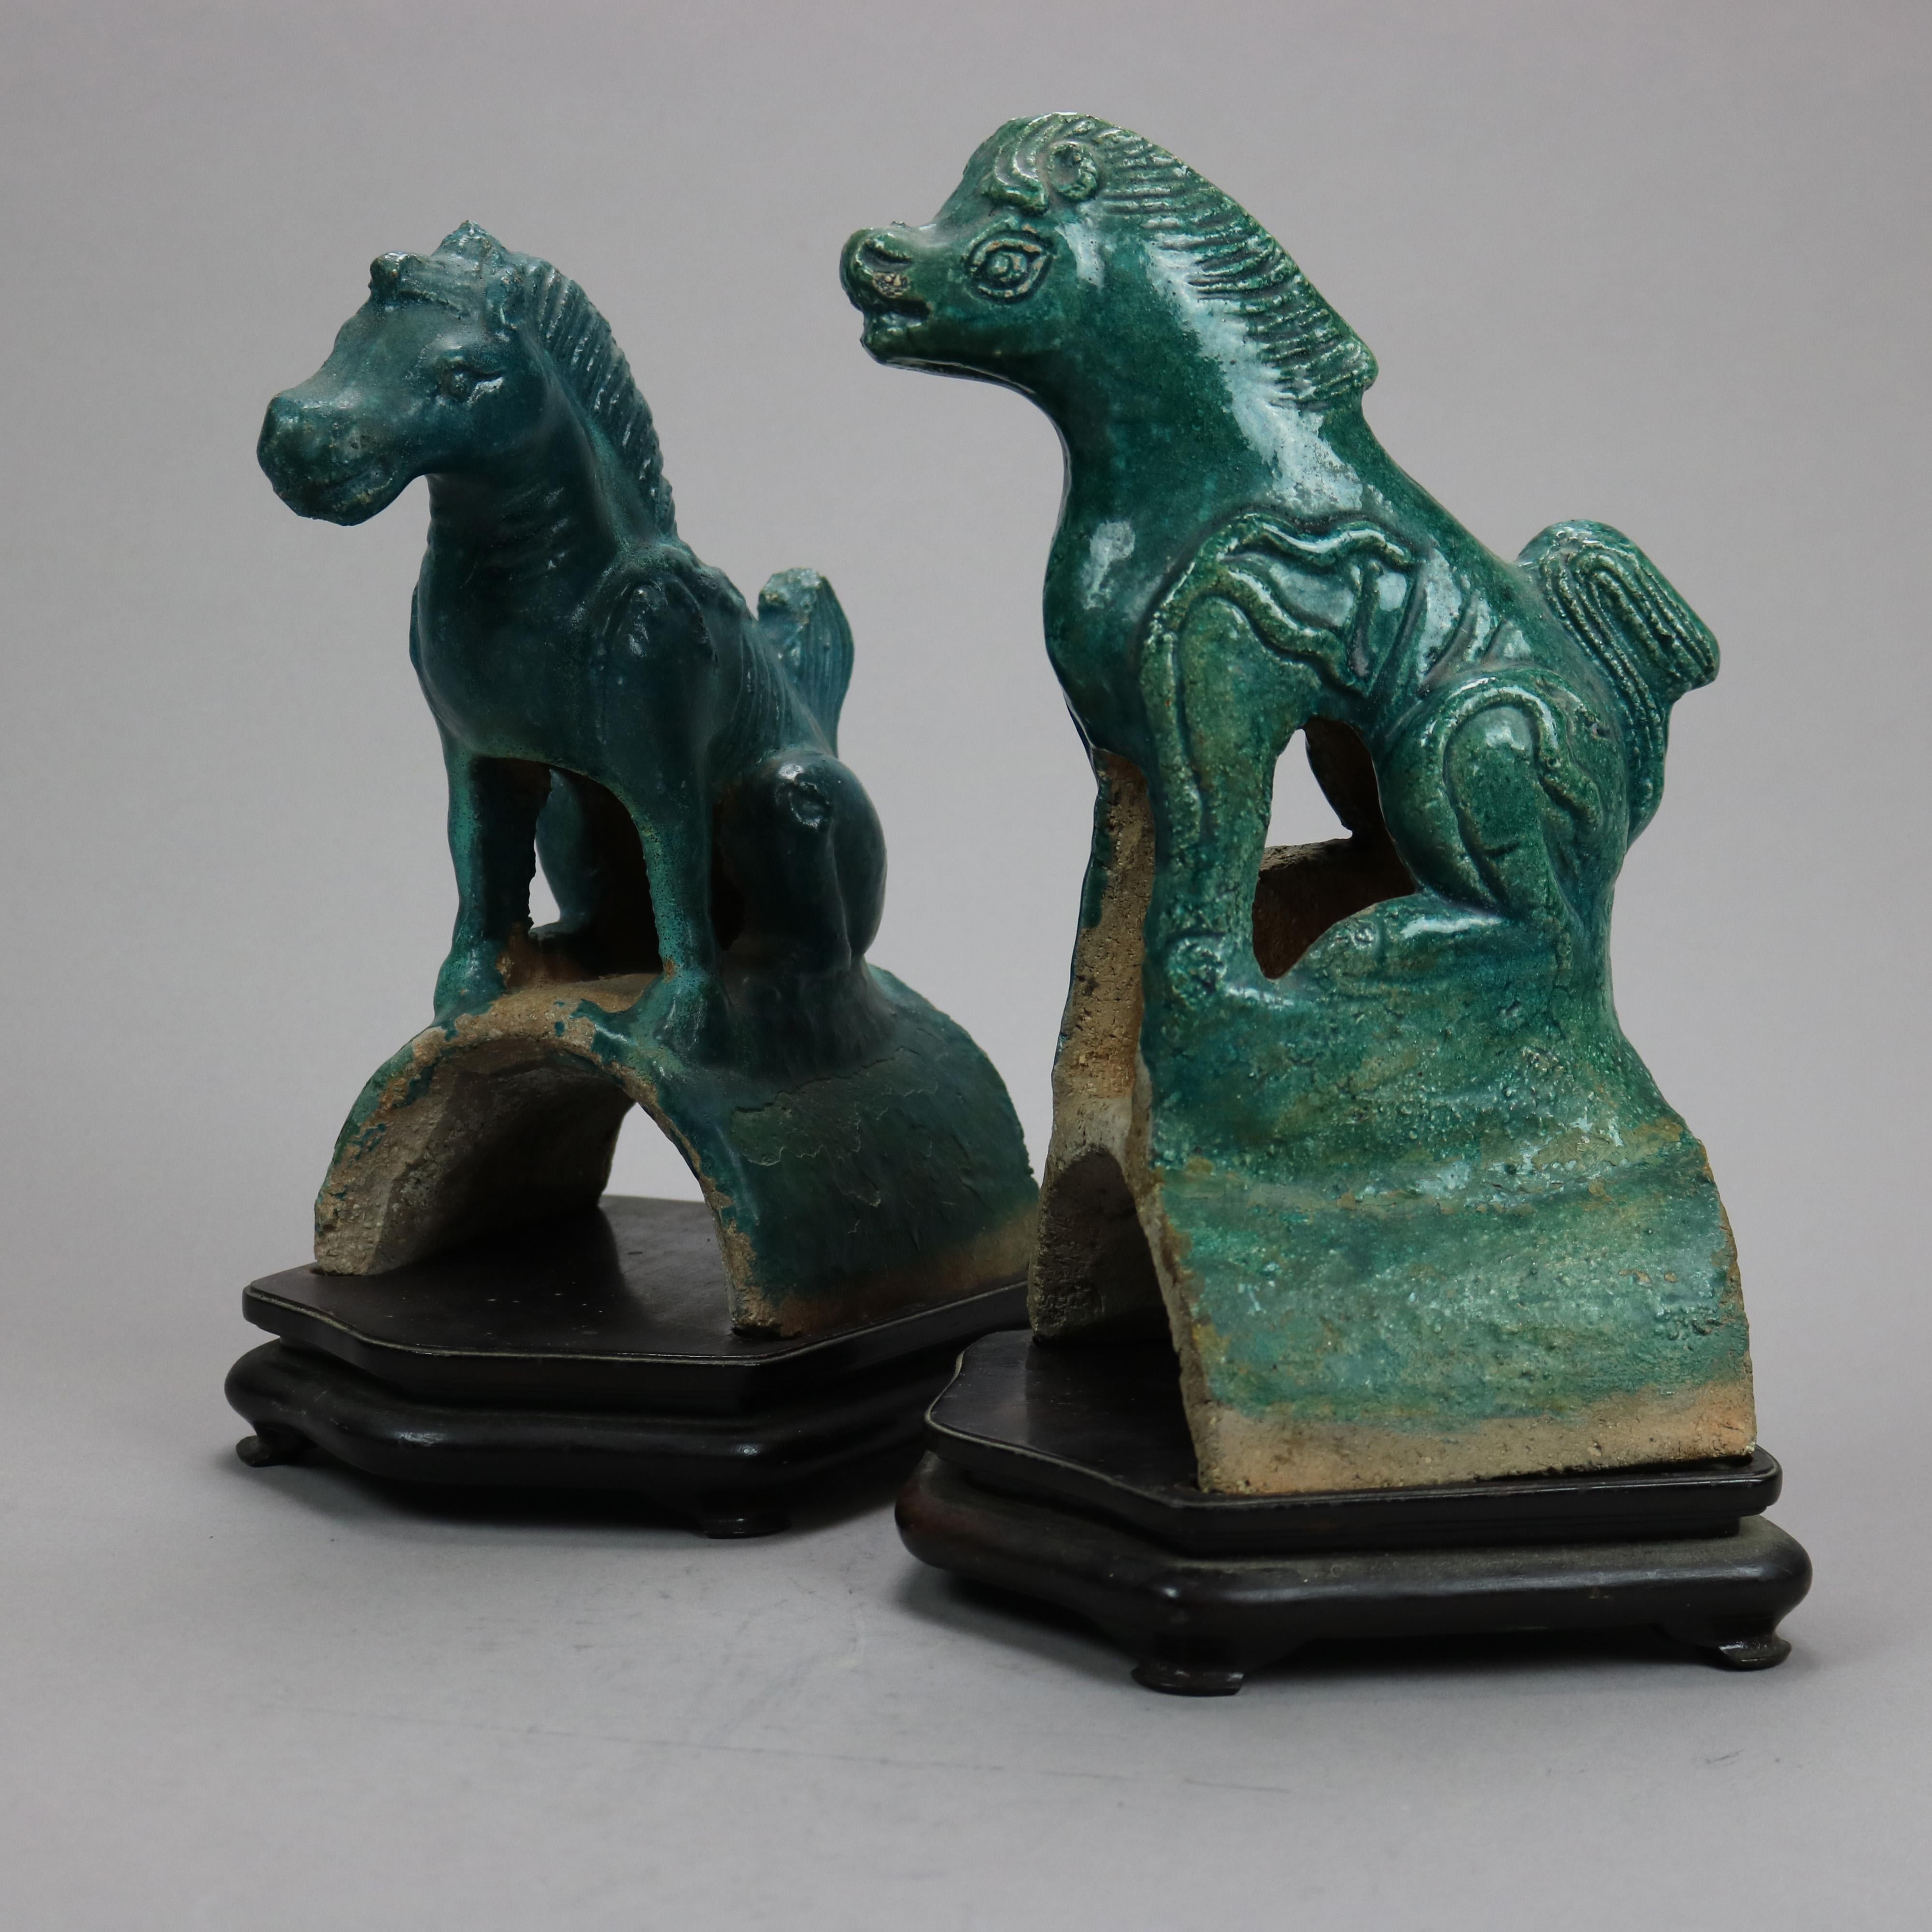 Glazed Antique Pair of Large Chinese Hand Crafted Terracotta Horse Figures, 19th C